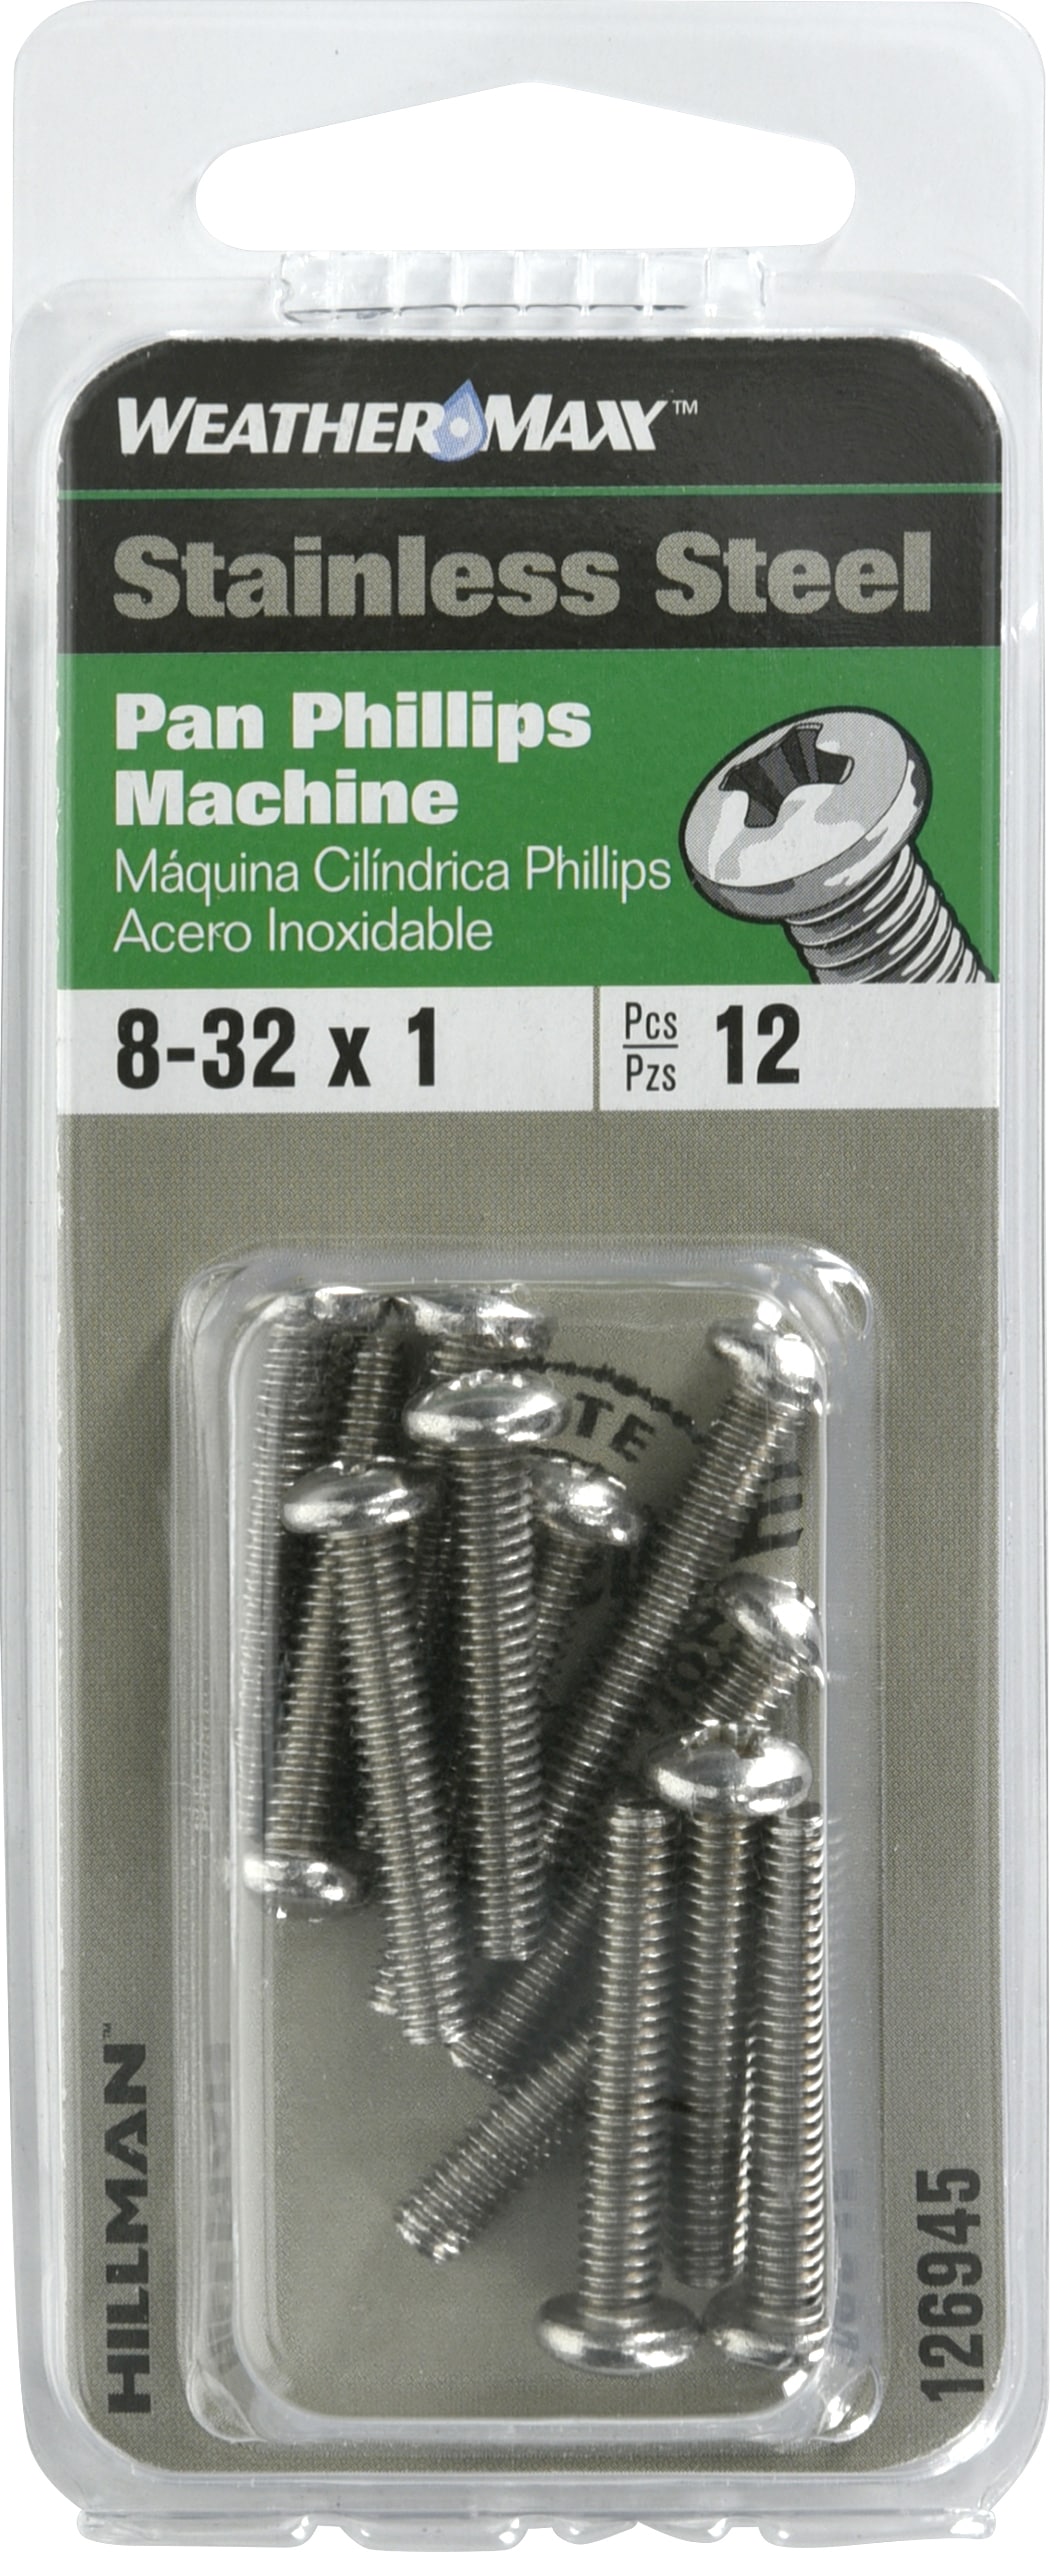 6-32 x 3/16” Fillister Head Slotted Machine Screws Stainless Steel 25 Pcs USA 